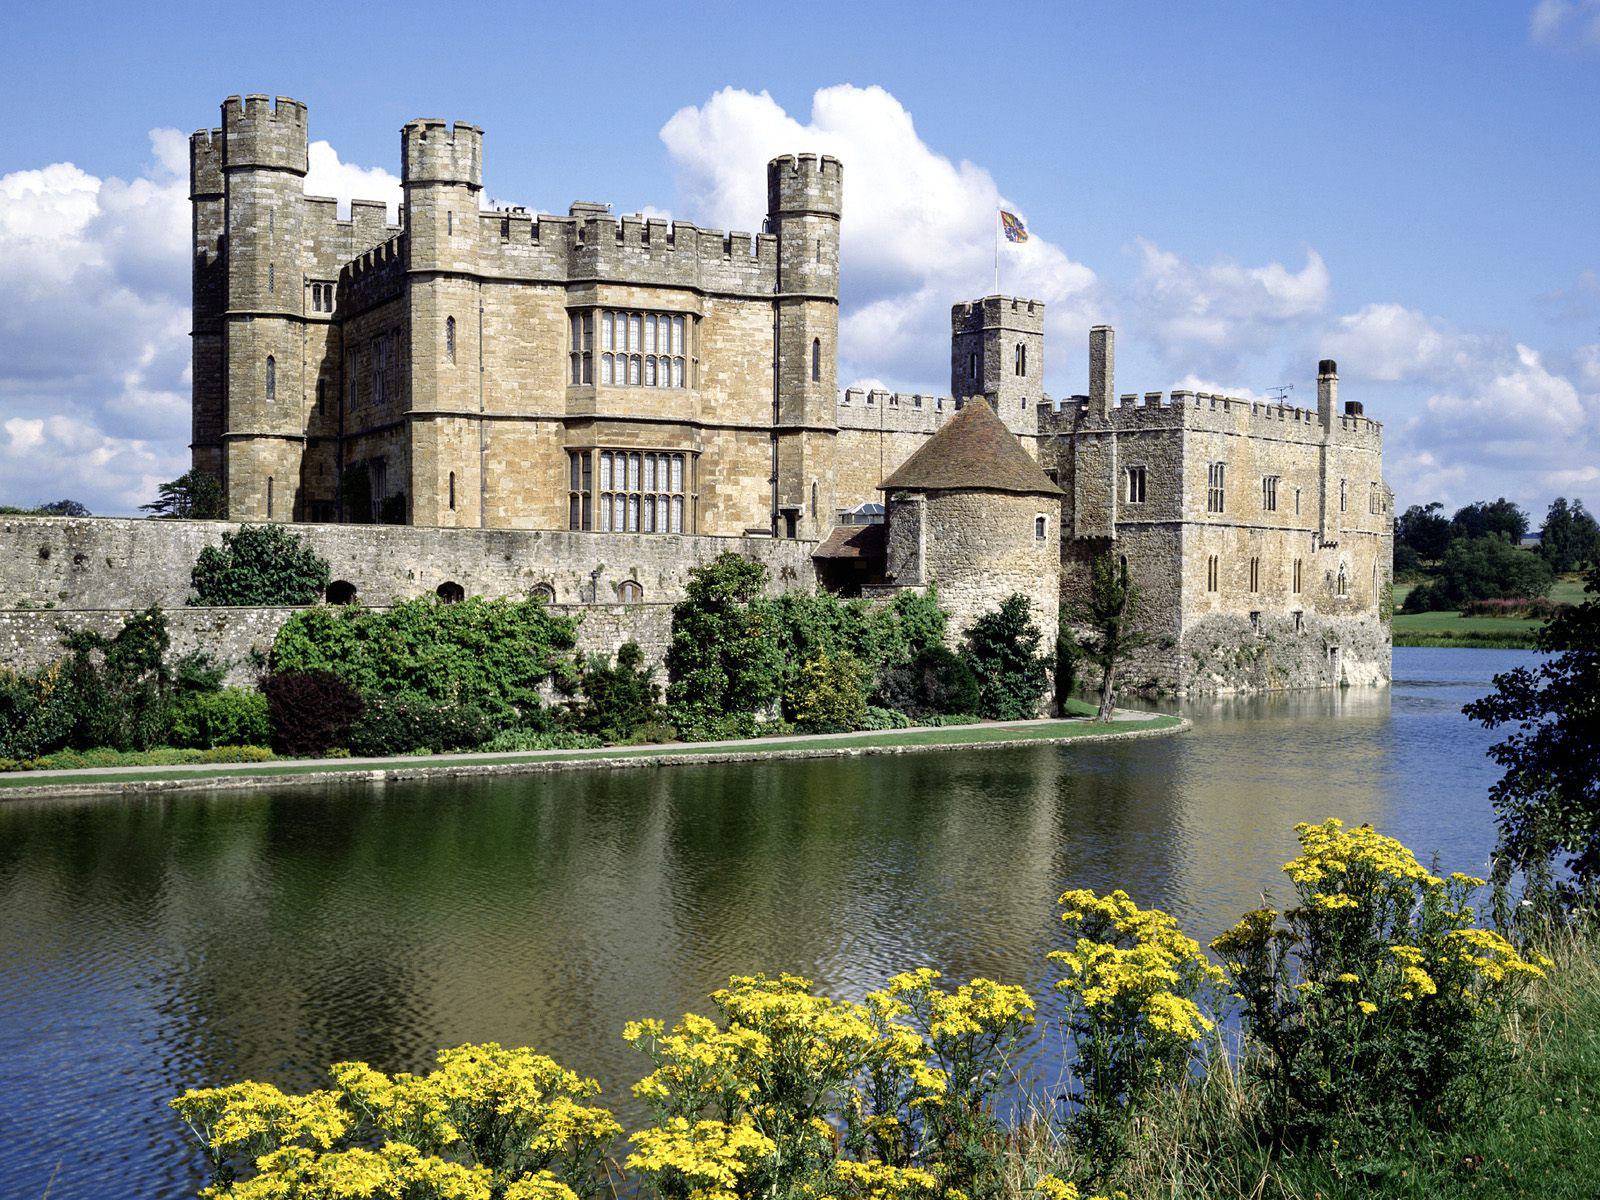 Leeds-Castle-for-Rent-During-The-London-2012-Olympics-£1M